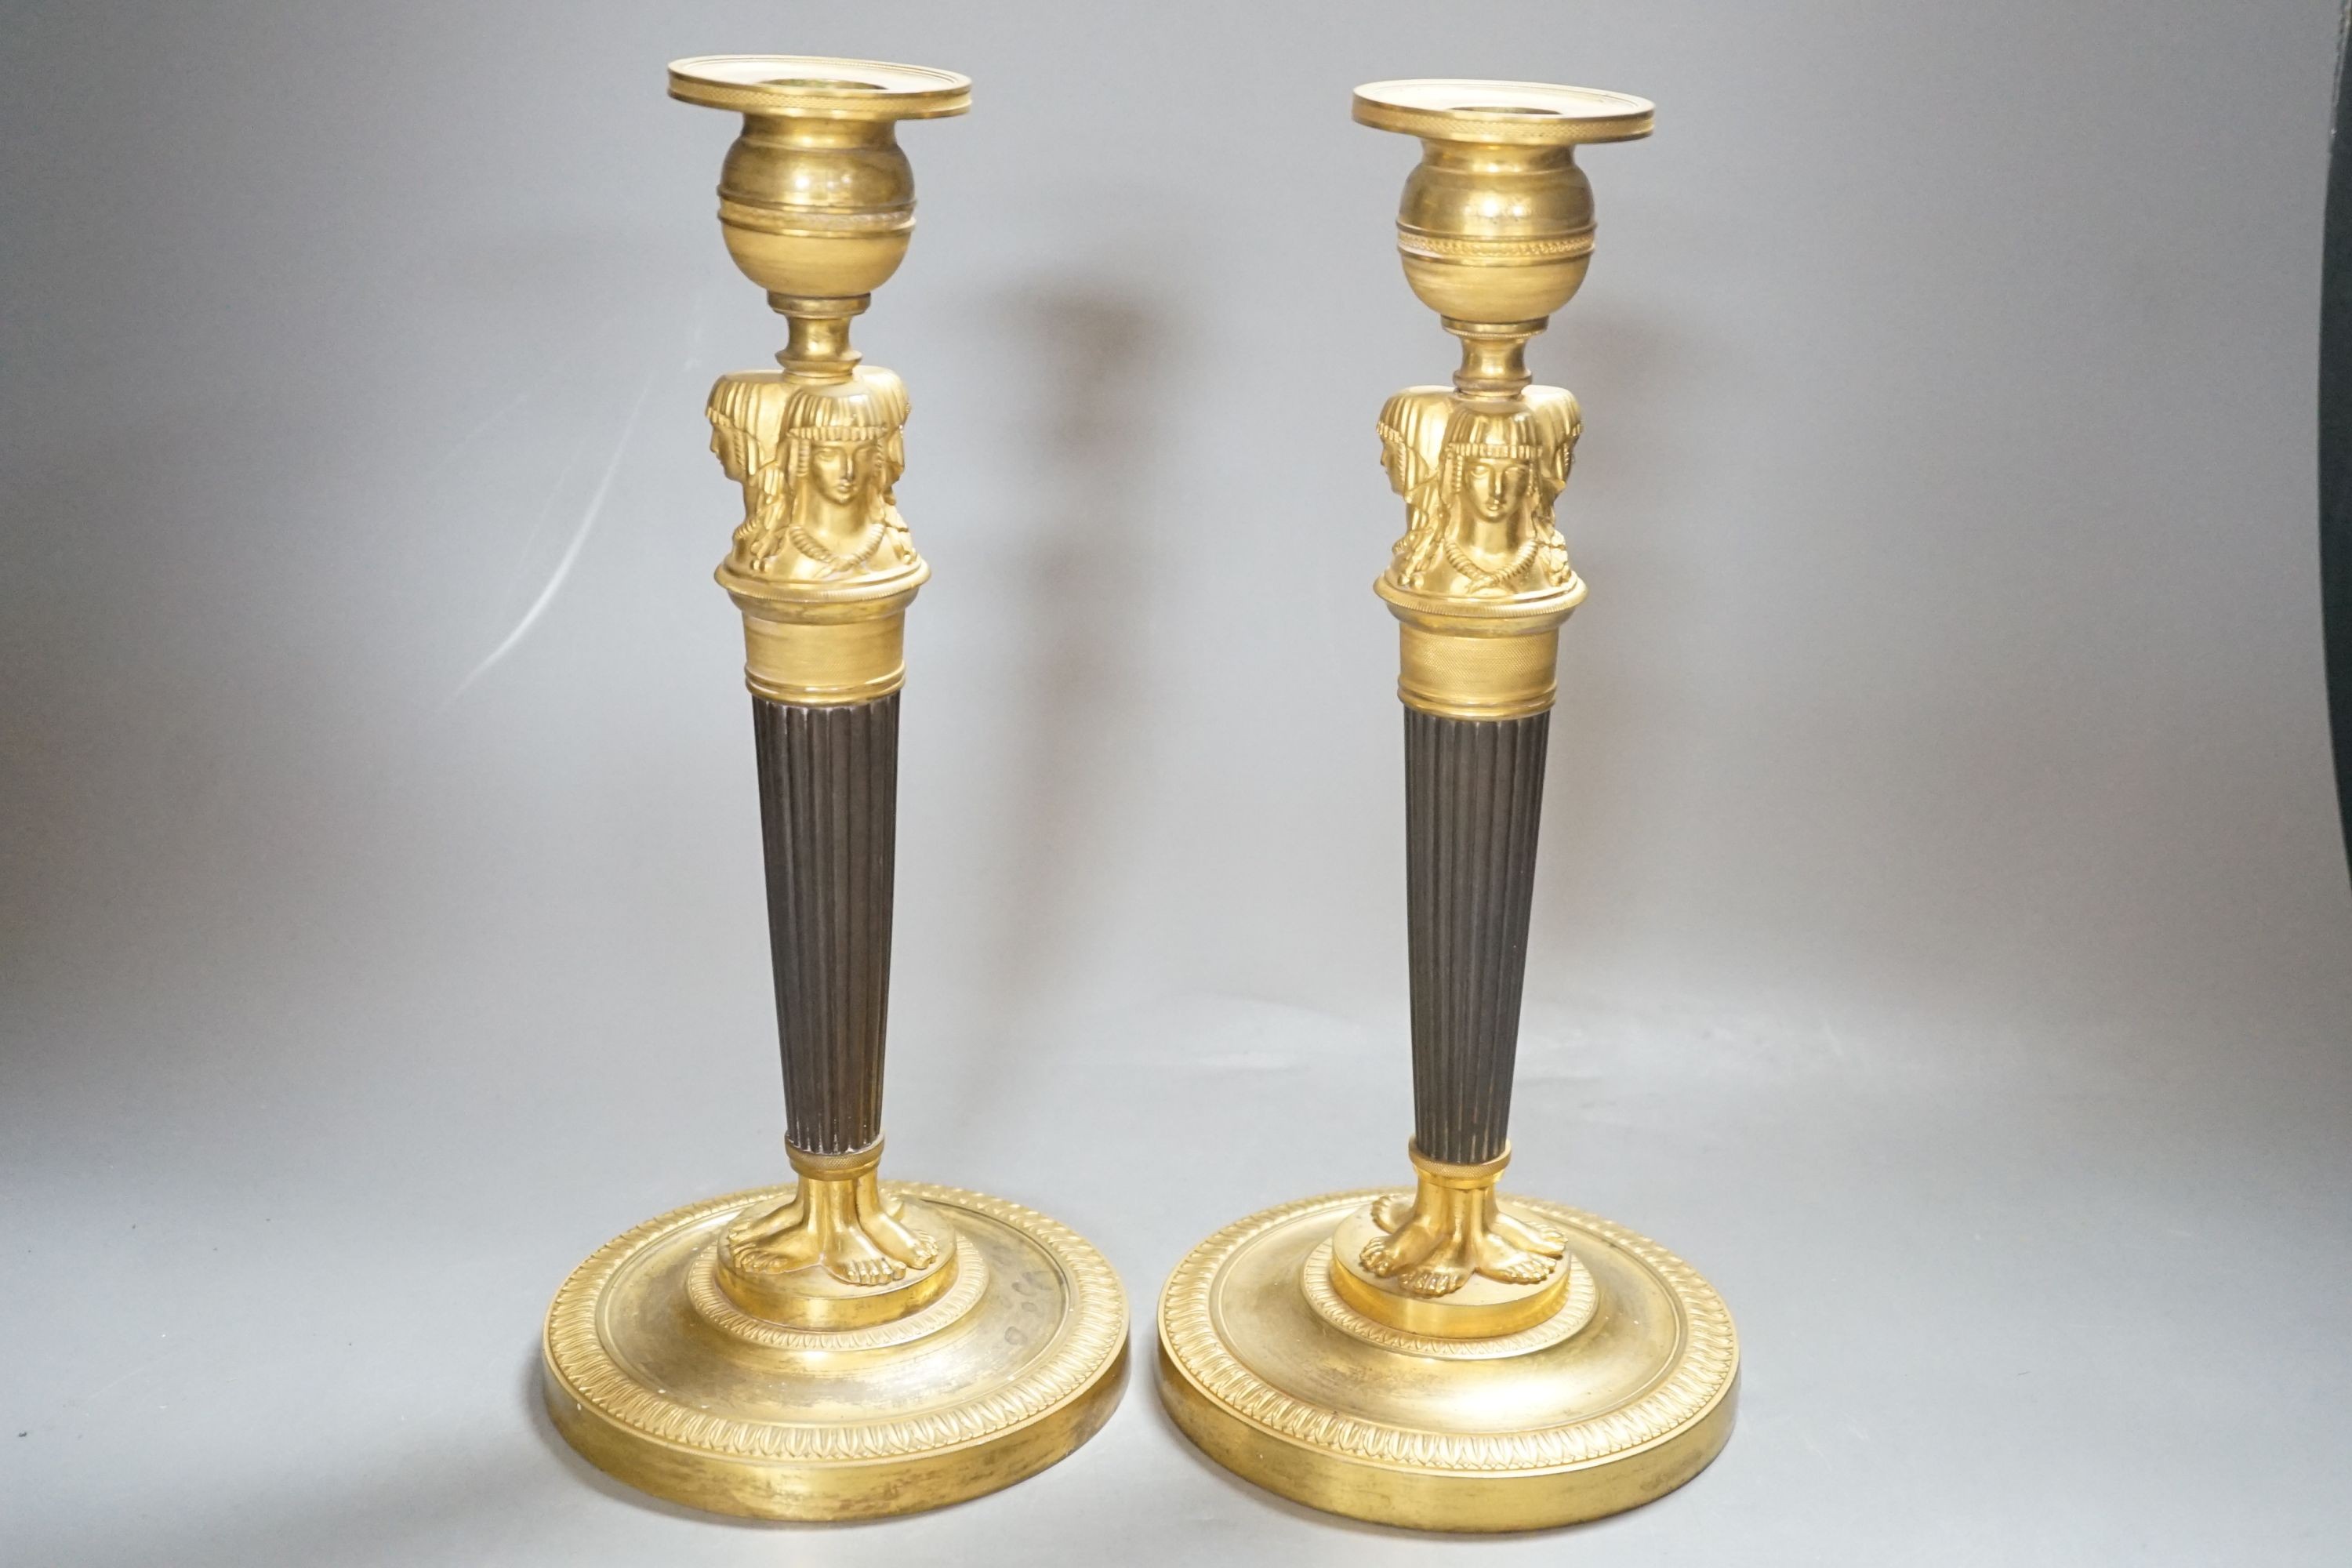 A pair of Empire style bronze and ormolu candlesticks - 29.5cm tall